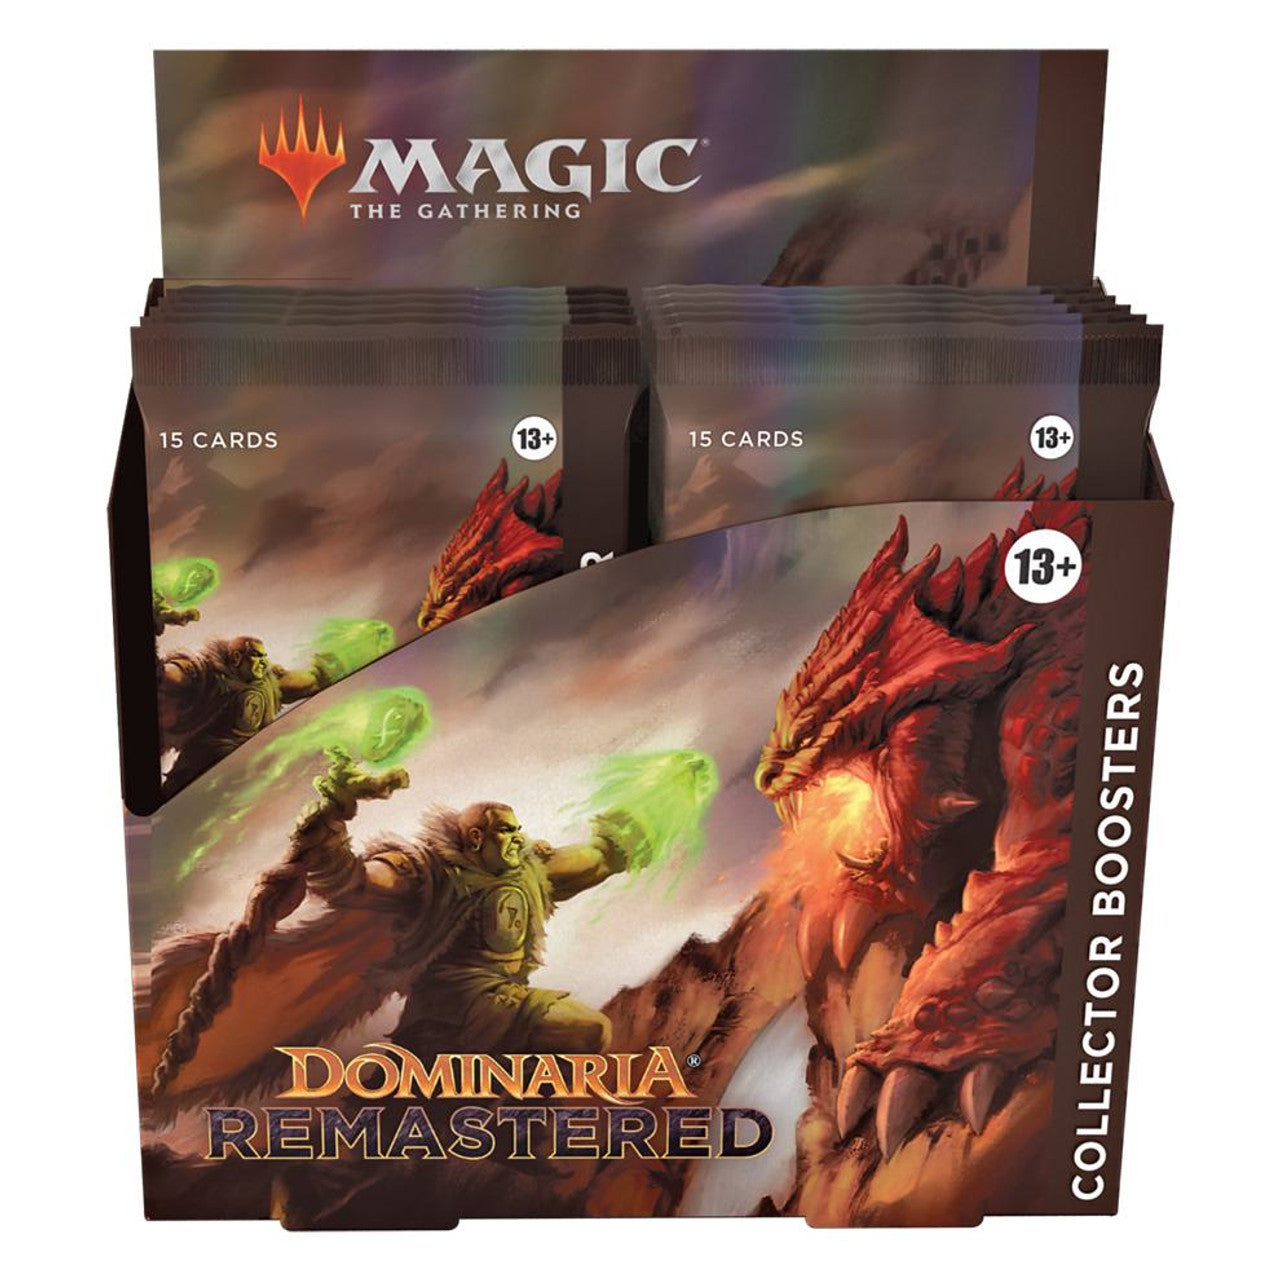 Dominaria Remastered Booster Boxes